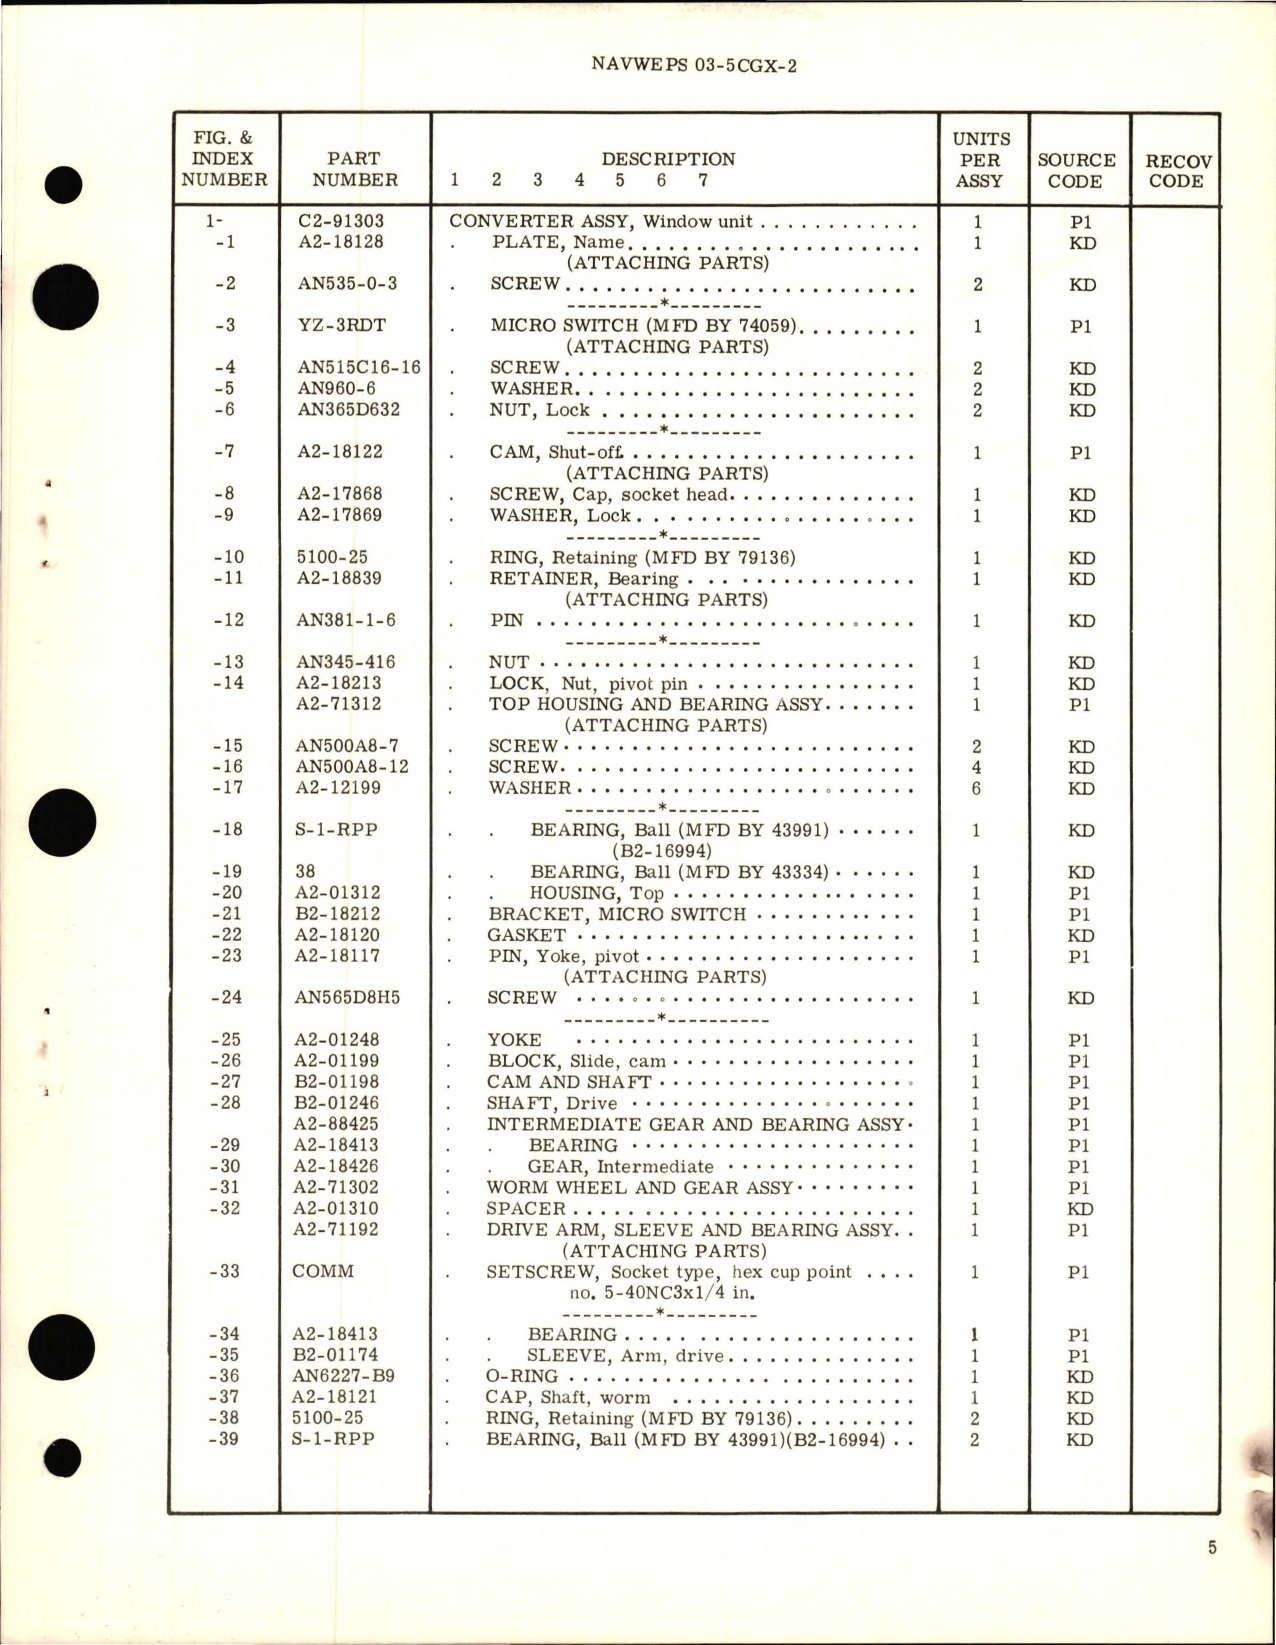 Sample page 5 from AirCorps Library document: Overhaul Instructions with Parts Breakdown for Window Unit Converter Assembly - Part C2-91303